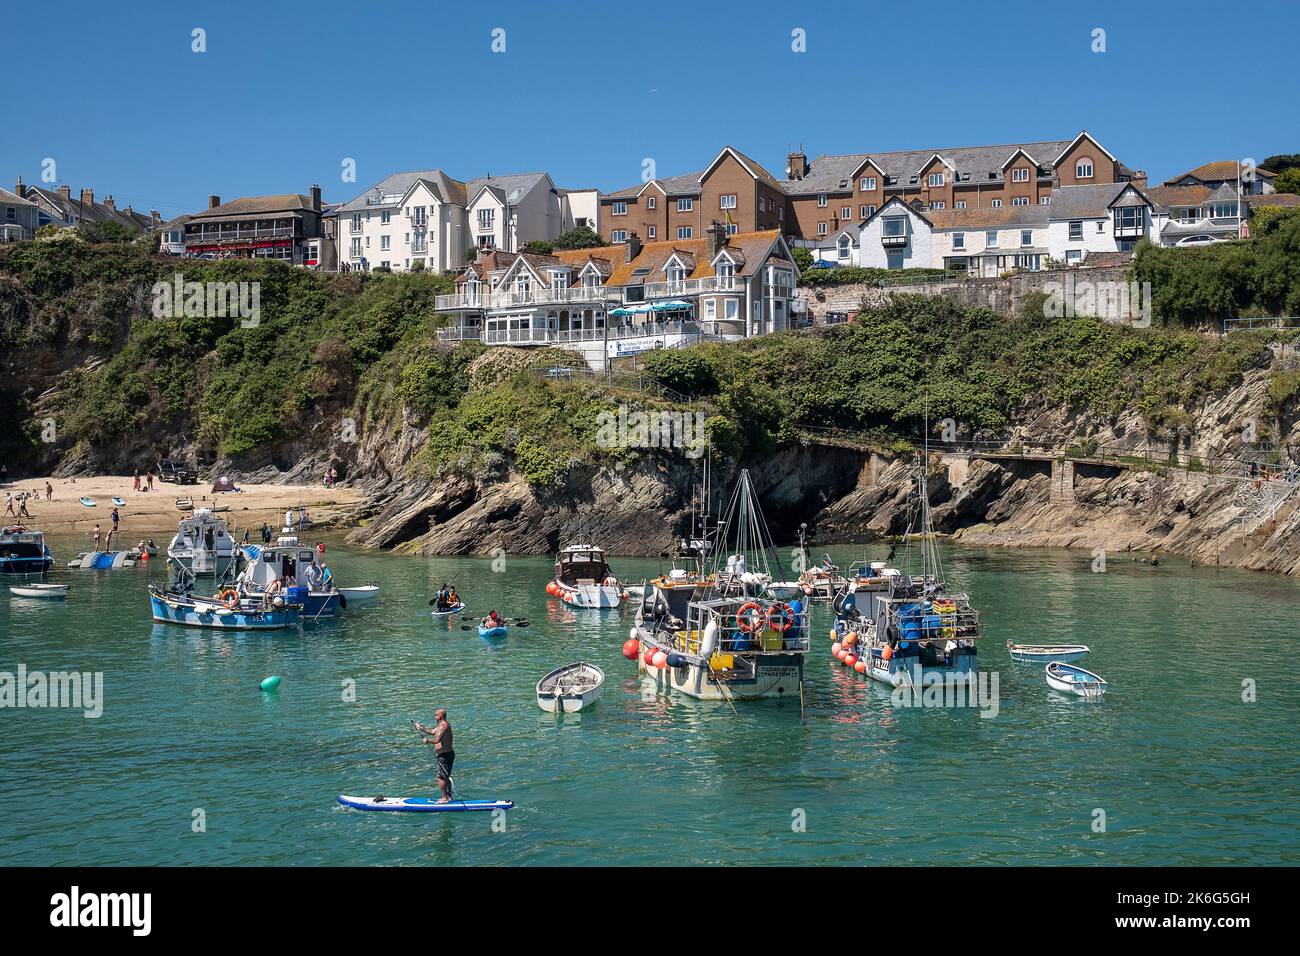 The picturesque Newquay Harbour Harbor In Cornwall in England in the UK. Stock Photo